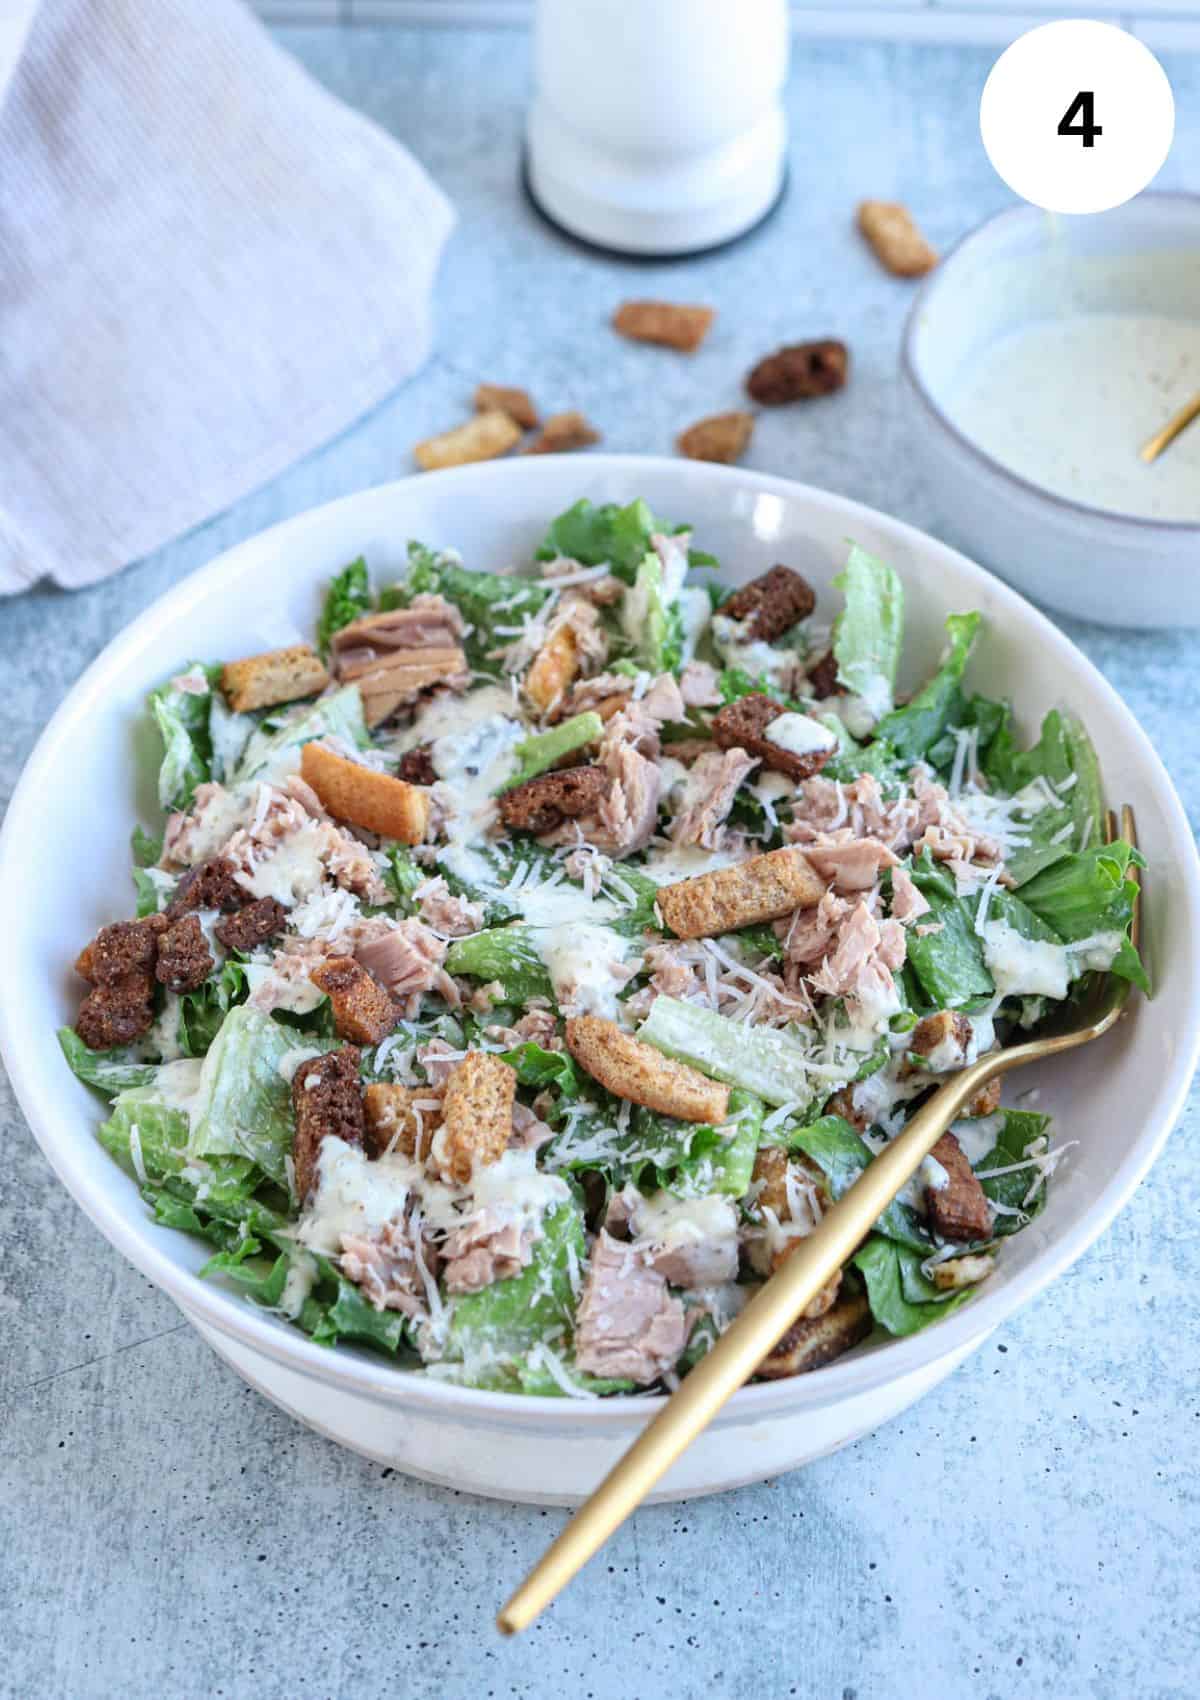 caesar salad wth coutons , tuna, parmesan cheese and dressing in a white bowl.